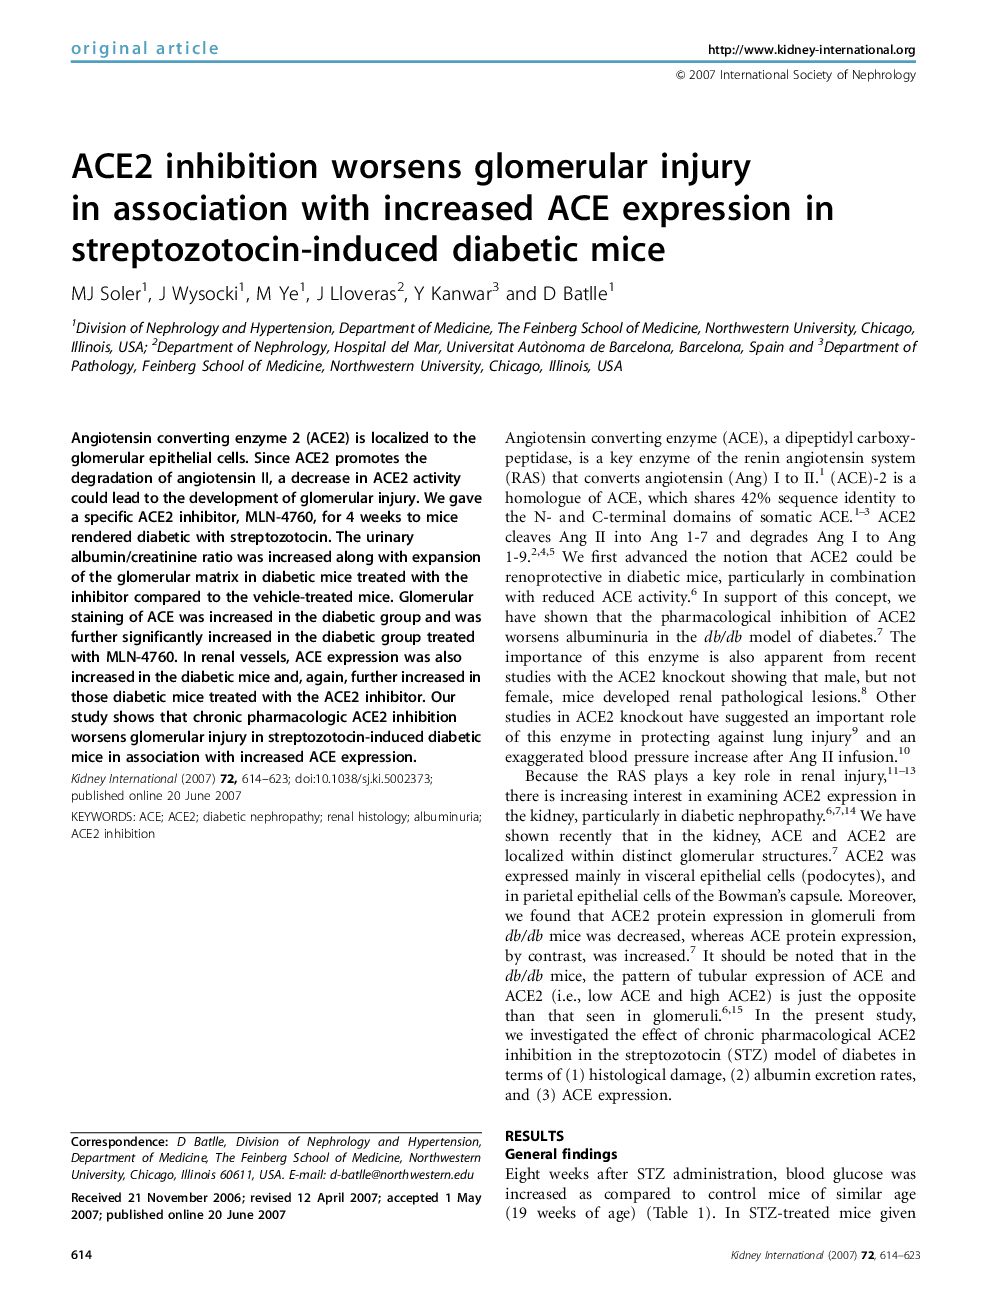 ACE2 inhibition worsens glomerular injury in association with increased ACE expression in streptozotocin-induced diabetic mice